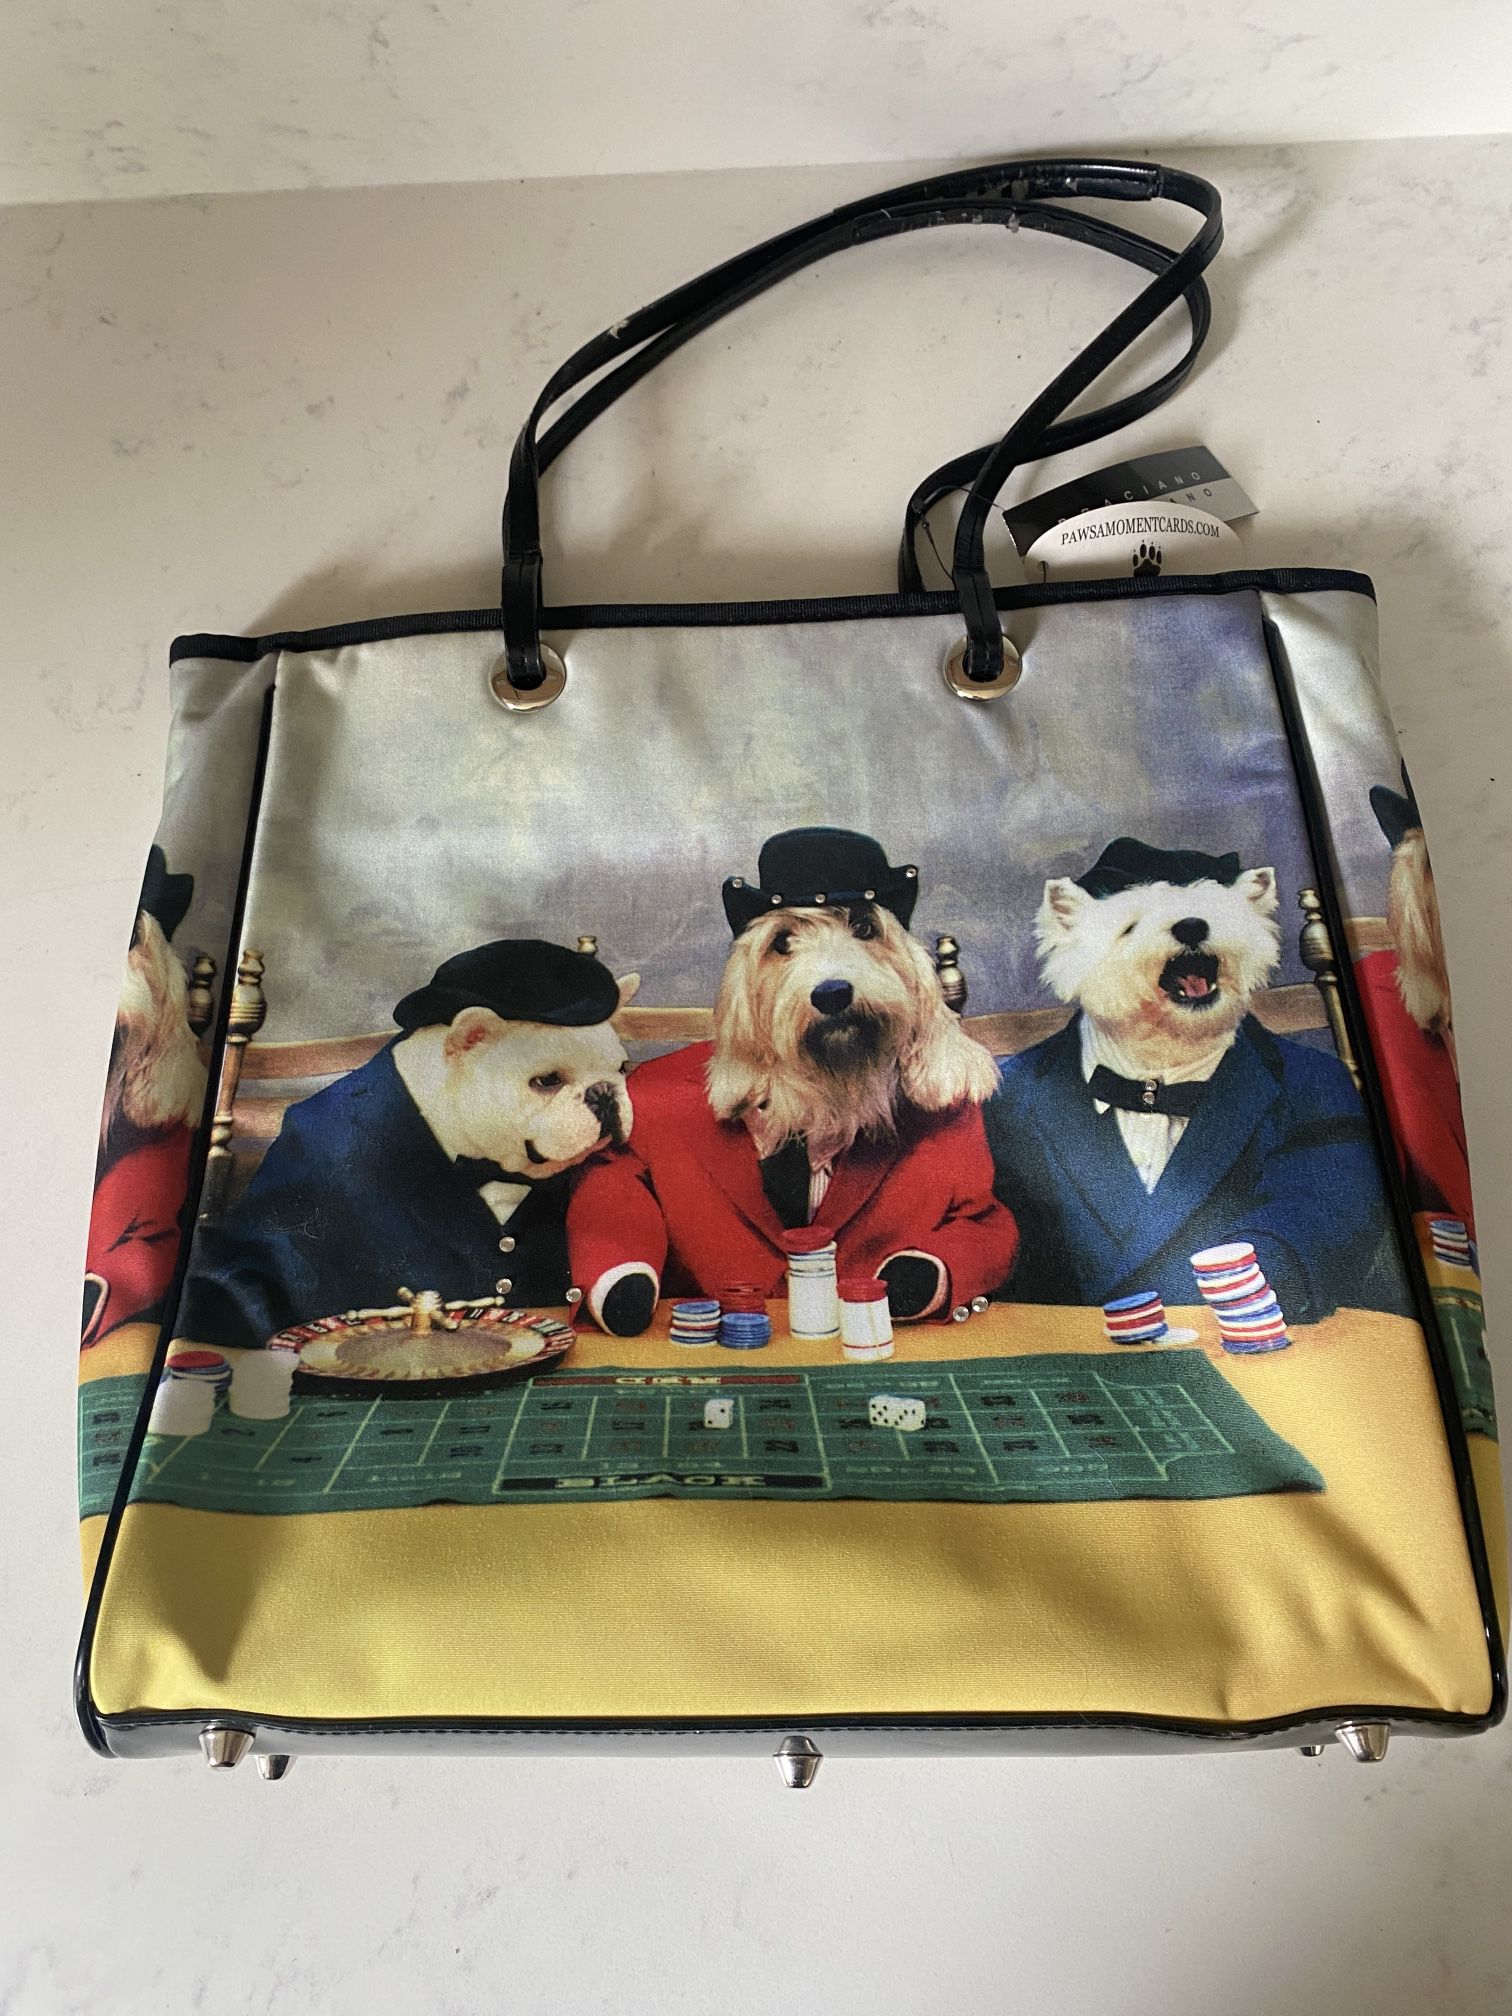 Funny Dogs Playing Poker Casino Roulette Table Gambling Las Vegas Photo  Print Purse Travel Tote Bag Storage for Sale in St. Louis, MO - OfferUp